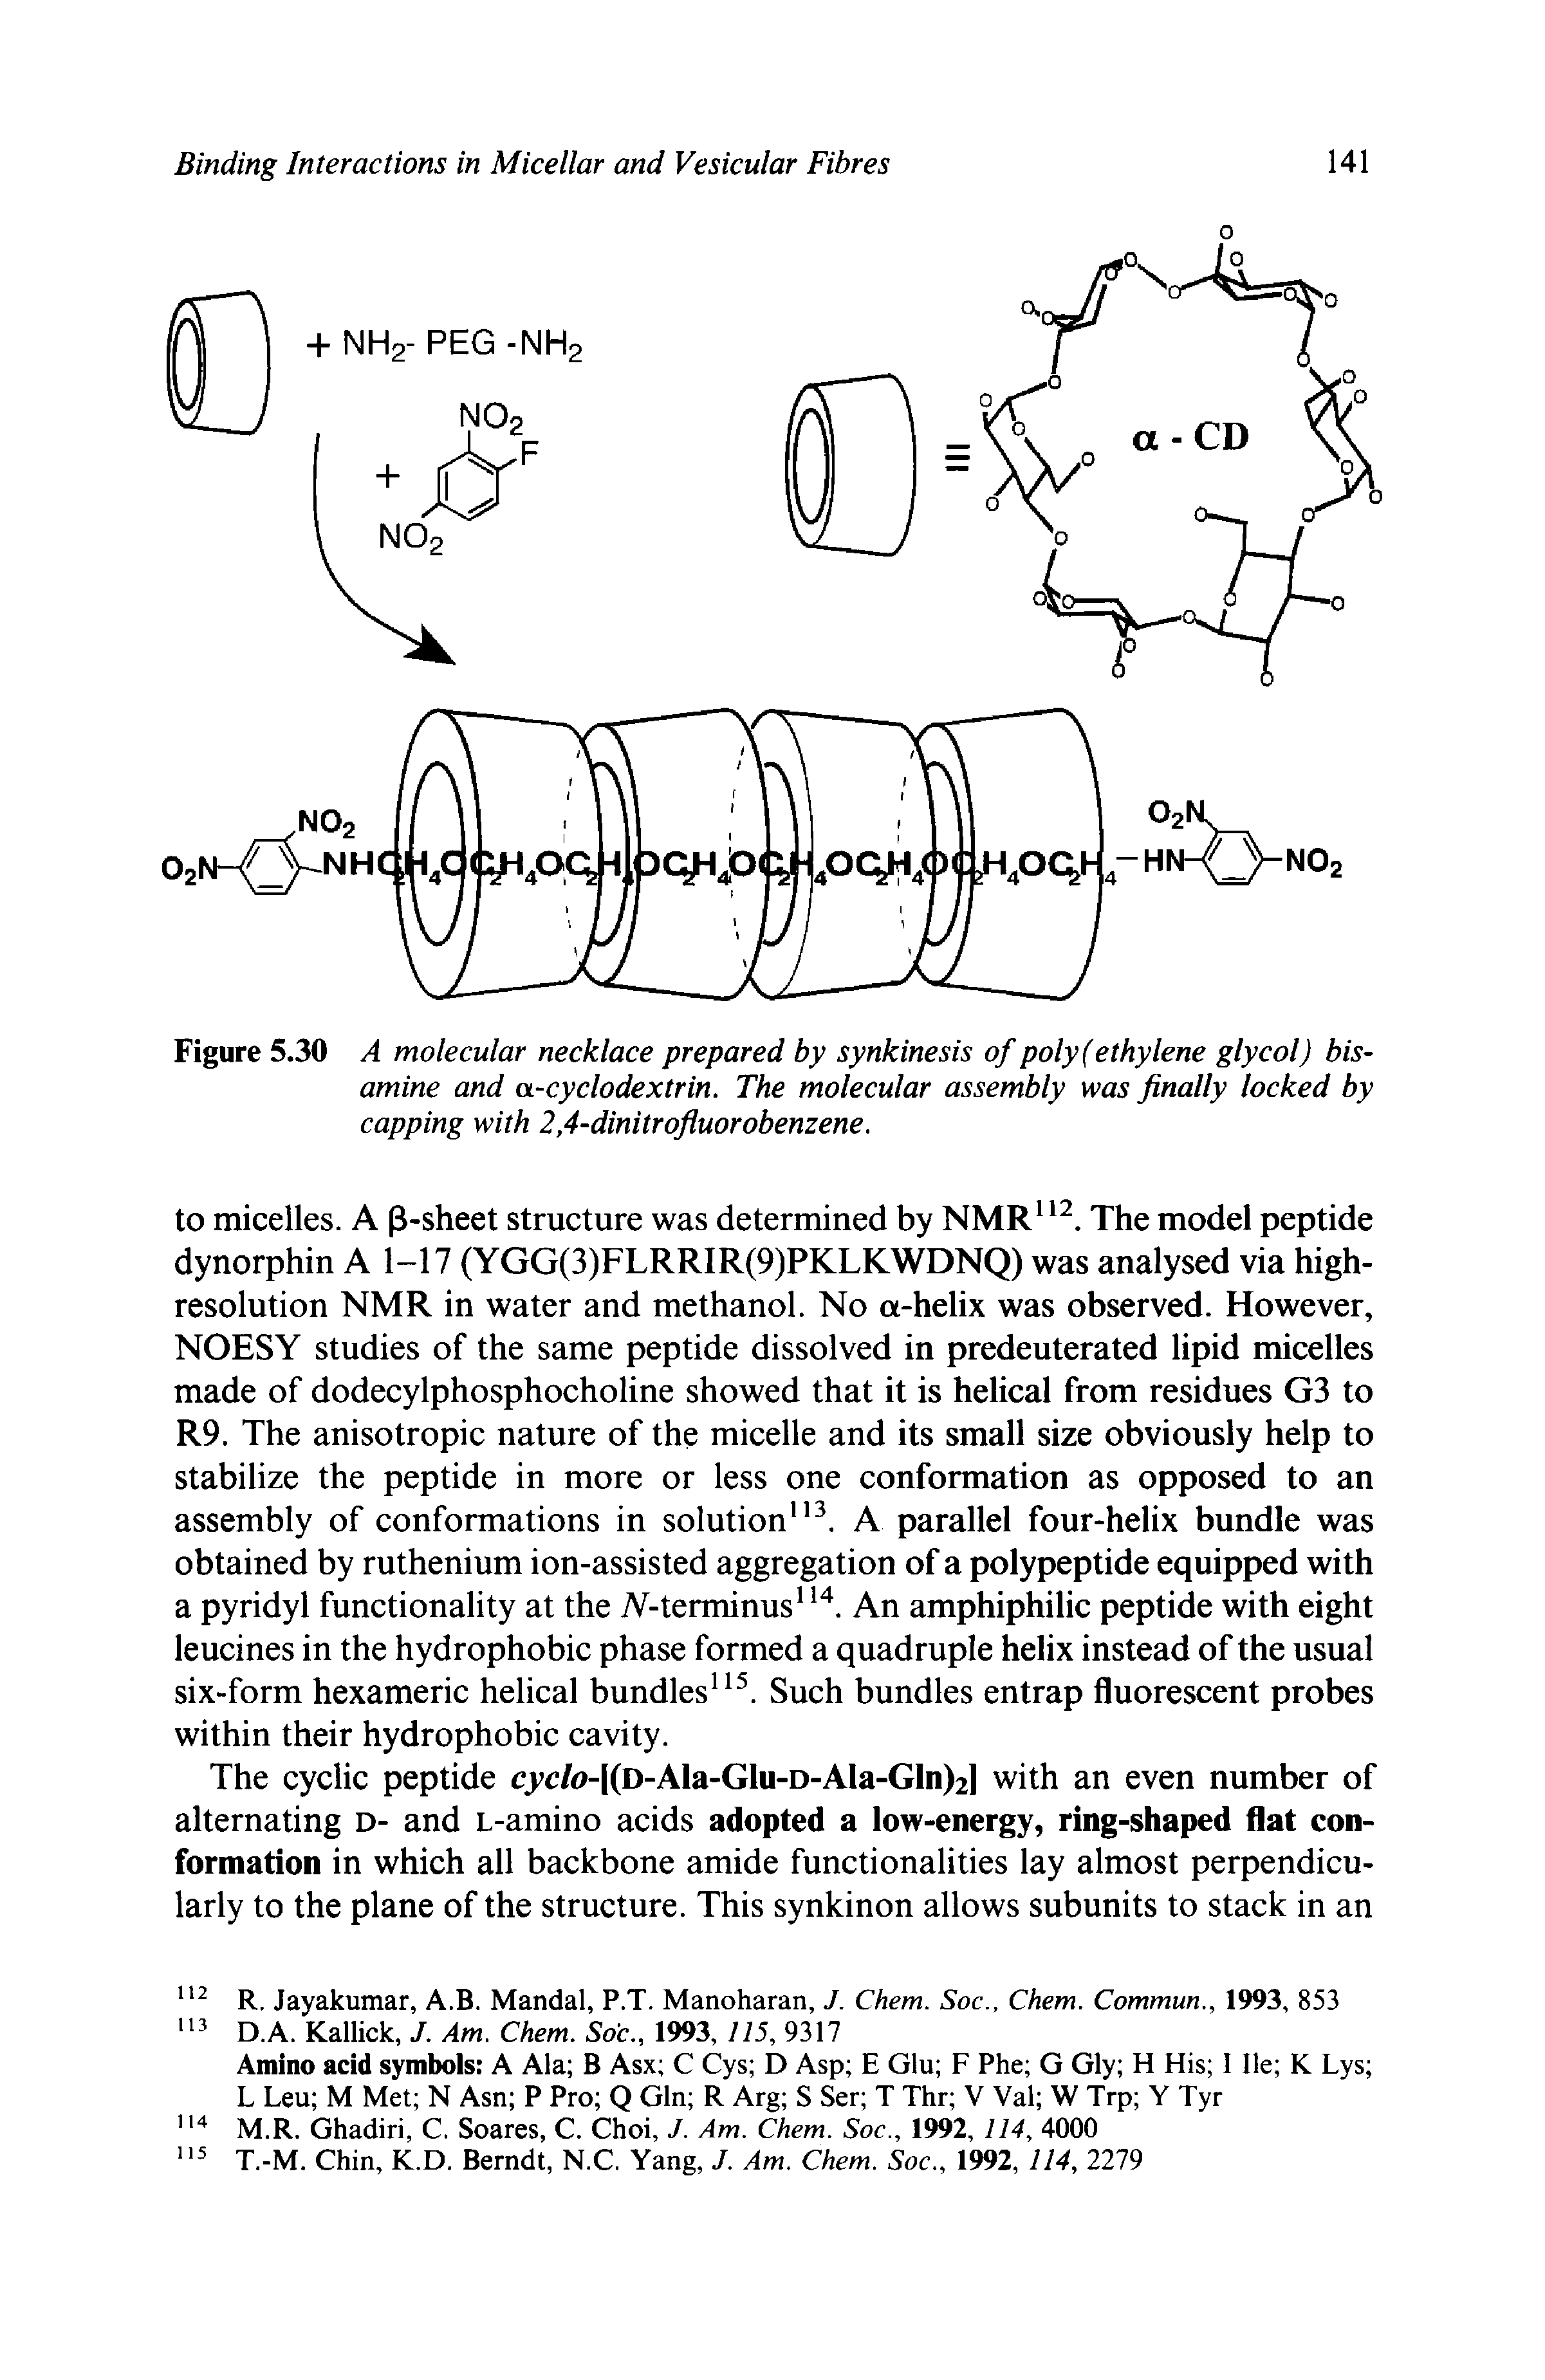 Figure 5.30 A molecular necklace prepared by synkinesis of poly (ethylene glycol) bis-amine and a-cyclodextrin. The molecular assembly was finally locked by capping with 2,4-dinitrofiuorobenzene.